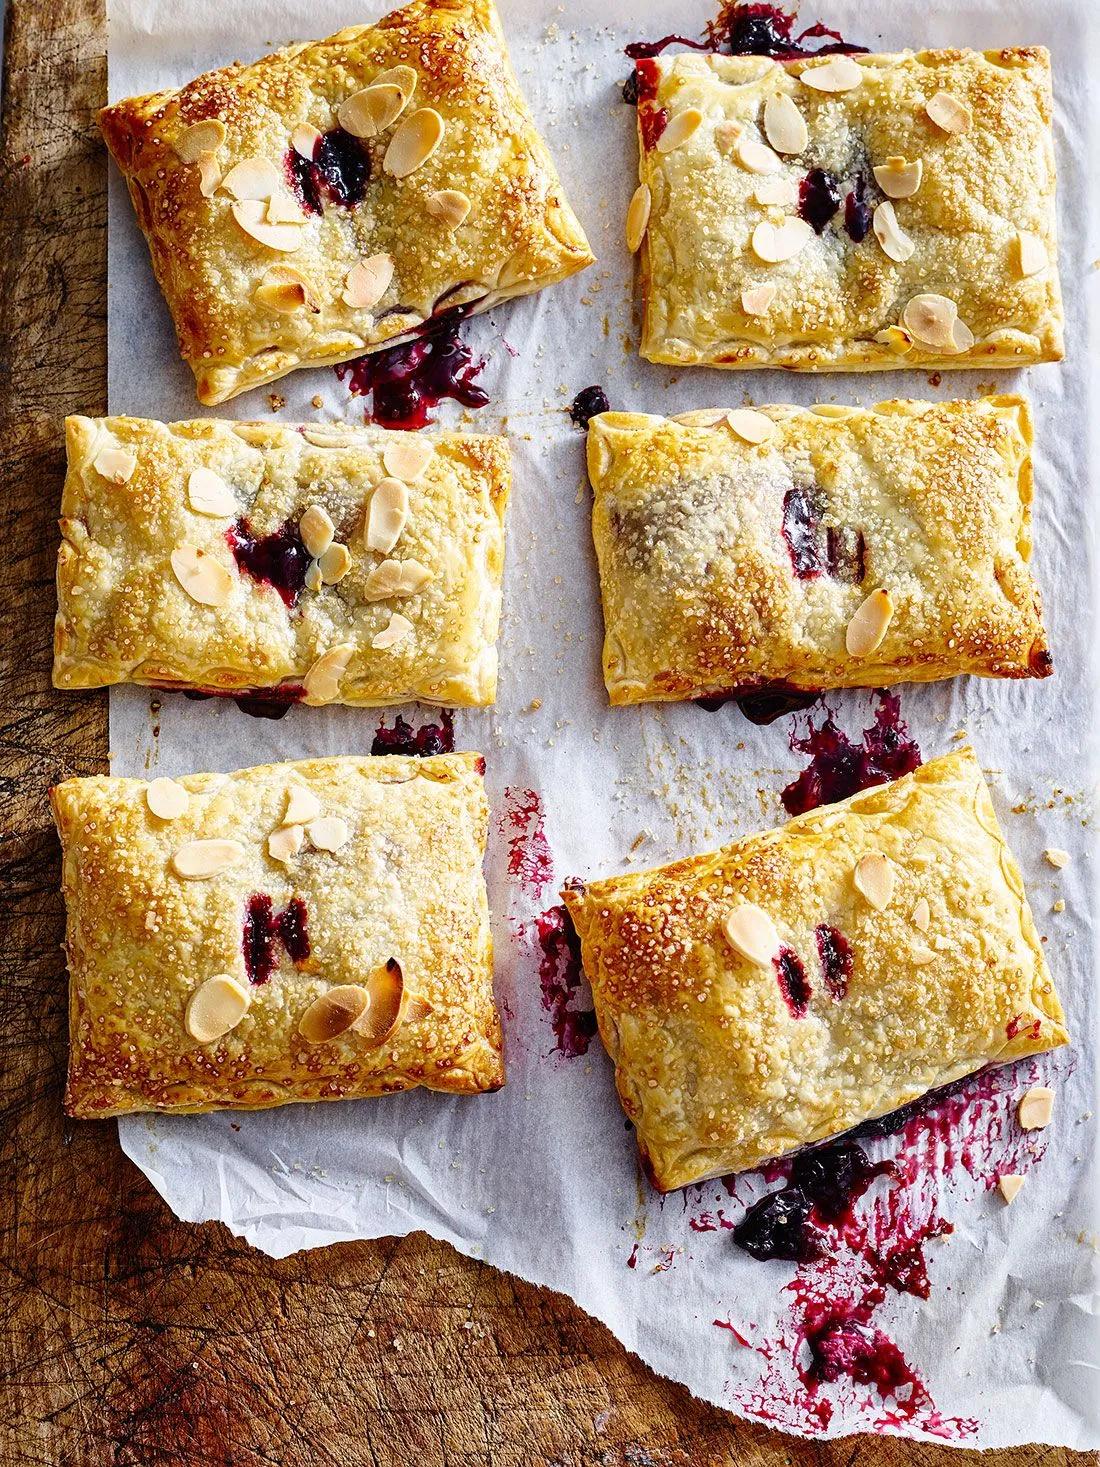 Sour cherry strudels (weichselstrudel) | Recipe (With images) | Sour ...